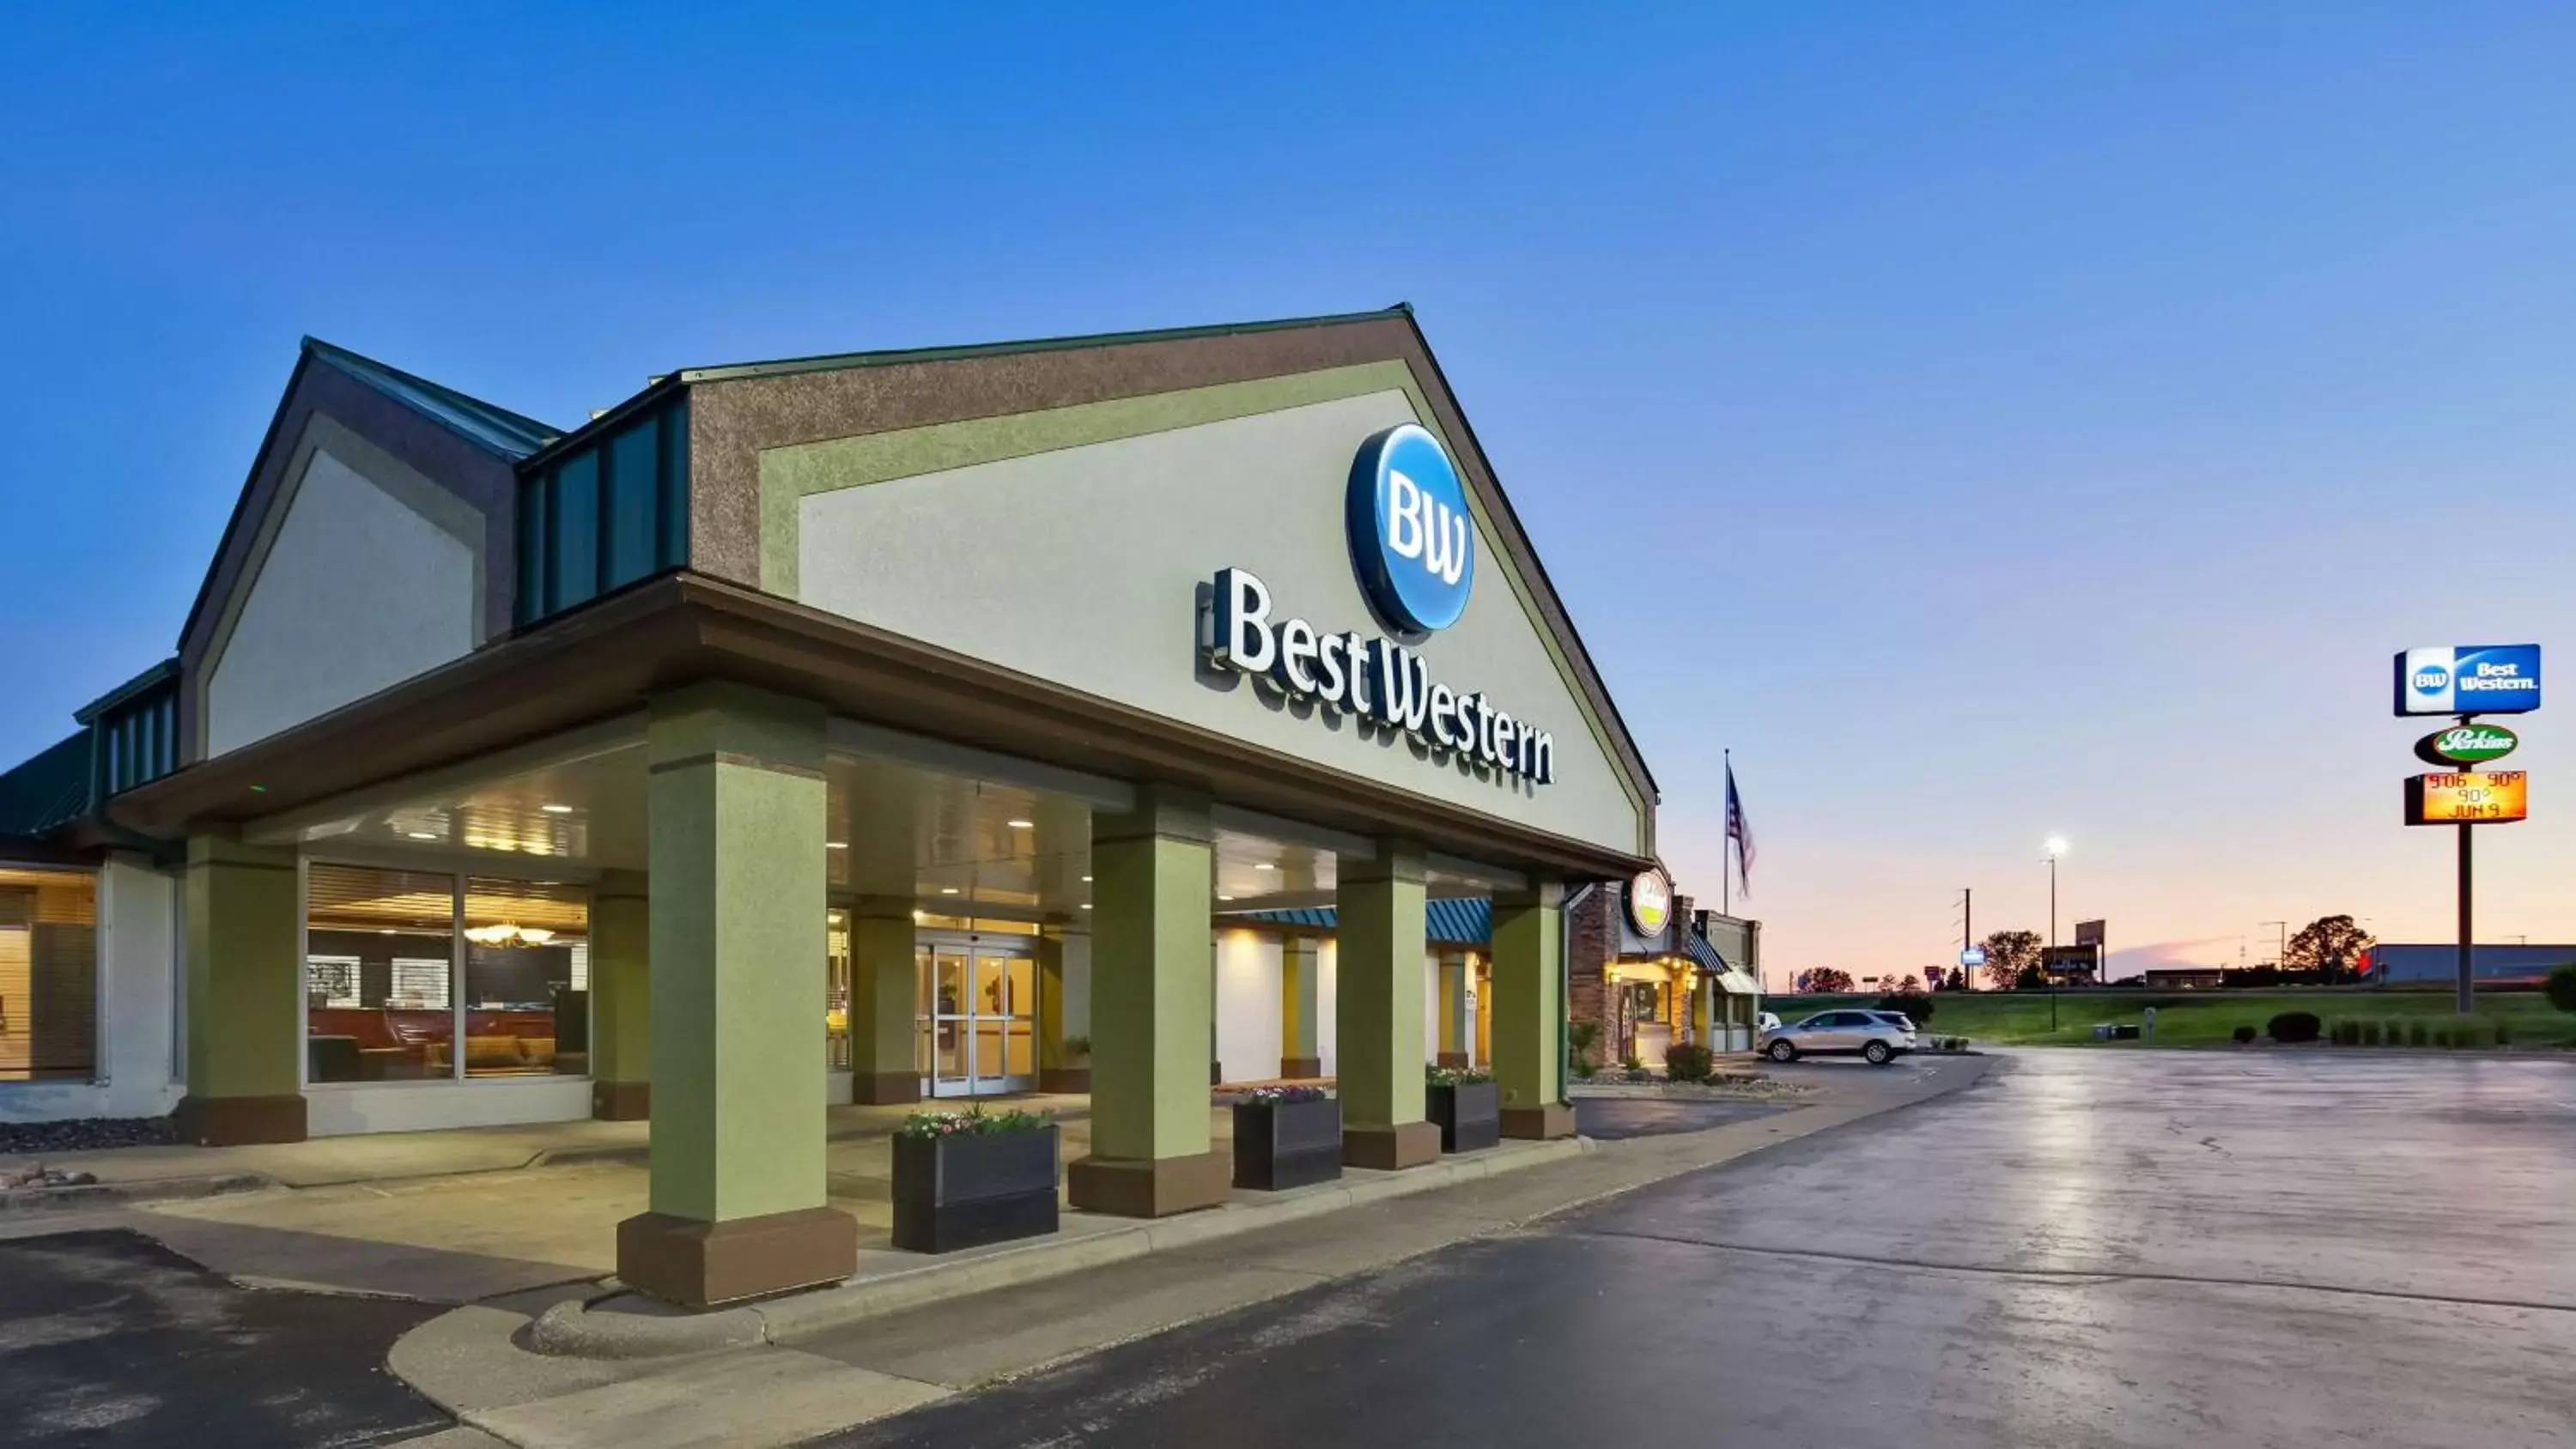 Property Building in Best Western Tomah Hotel